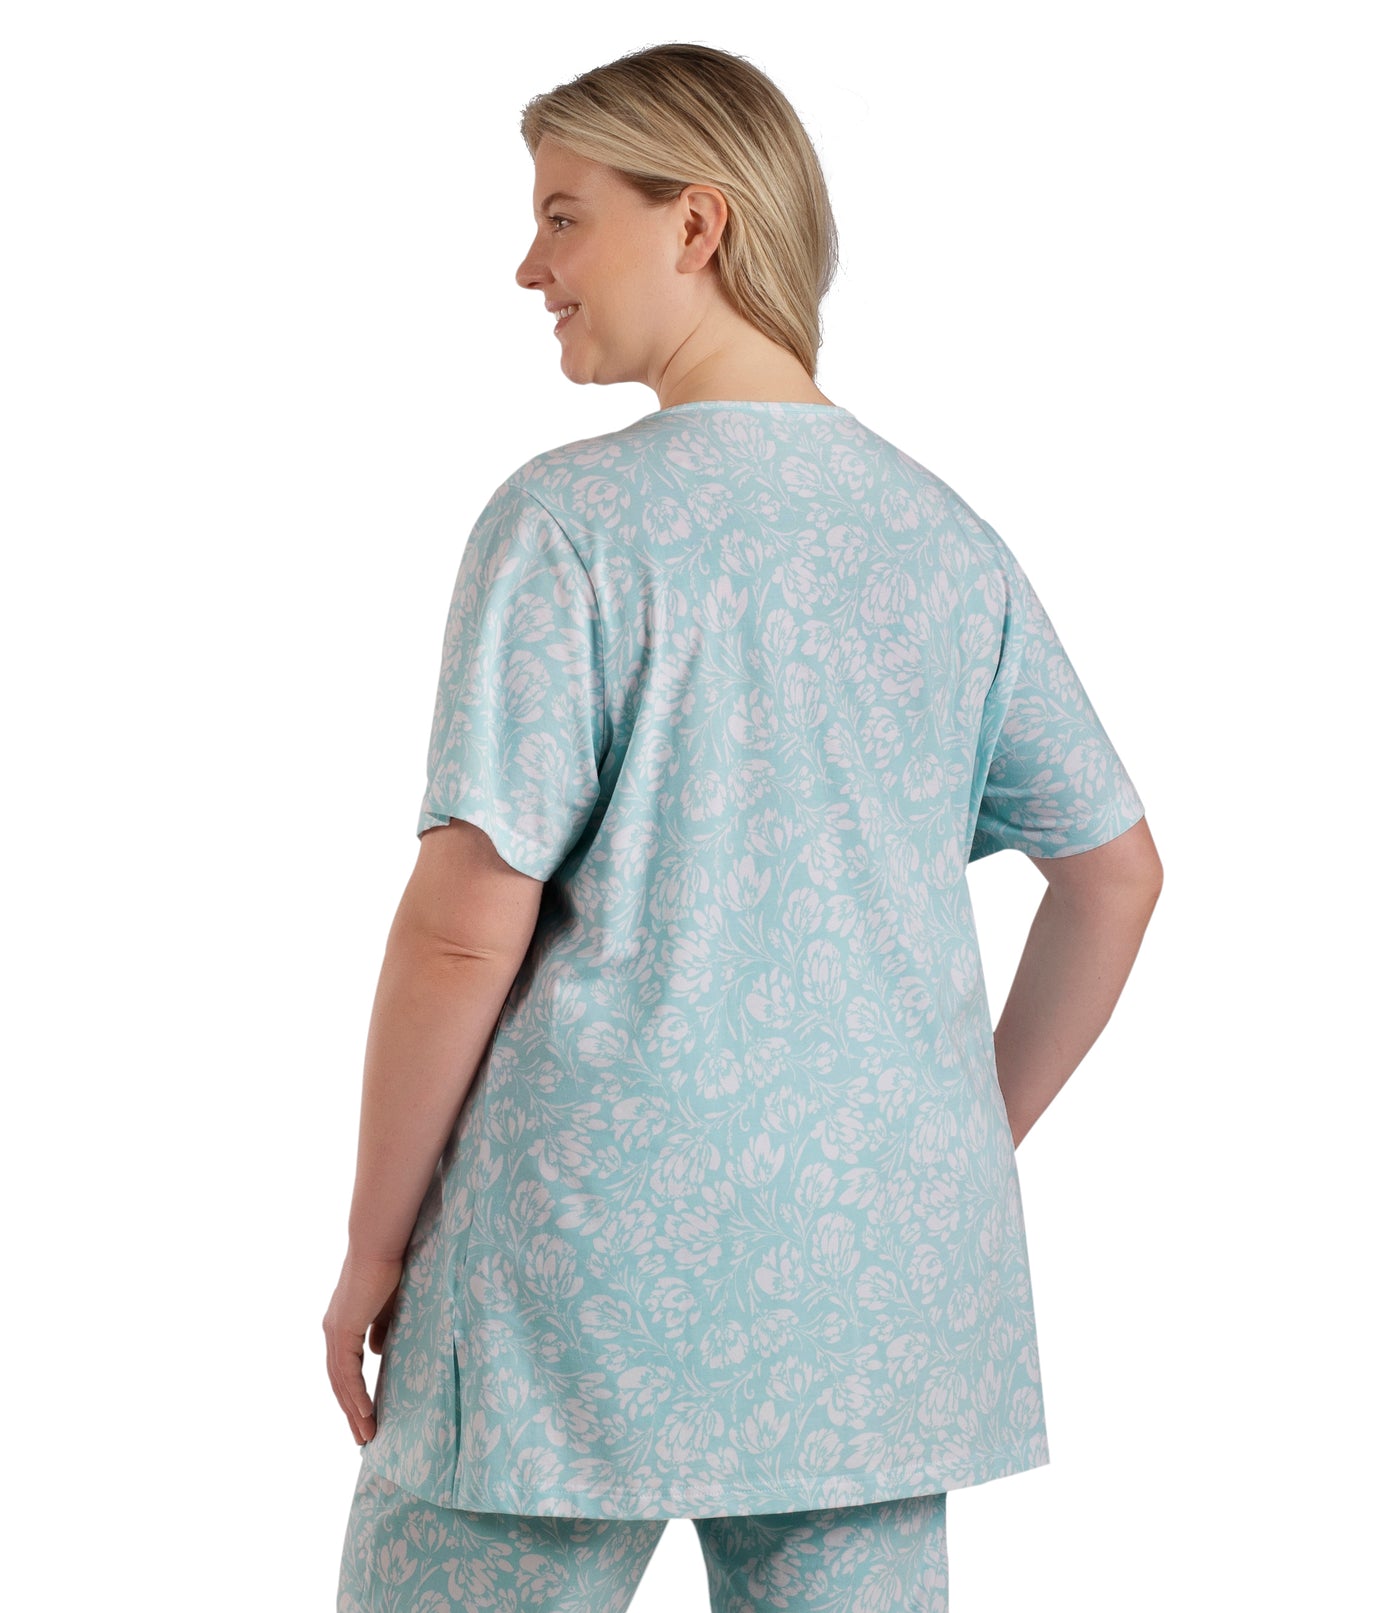 Plus size woman, facing back side profile, wearing JunoActive plus size JunoBliss V-Neck Short Sleeve Sleep Top in color Spring Blue Floral Print. The woman is wearing a pair of JunoBliss Pocketed Sleep Pants in color Spring Blue Floral Print.